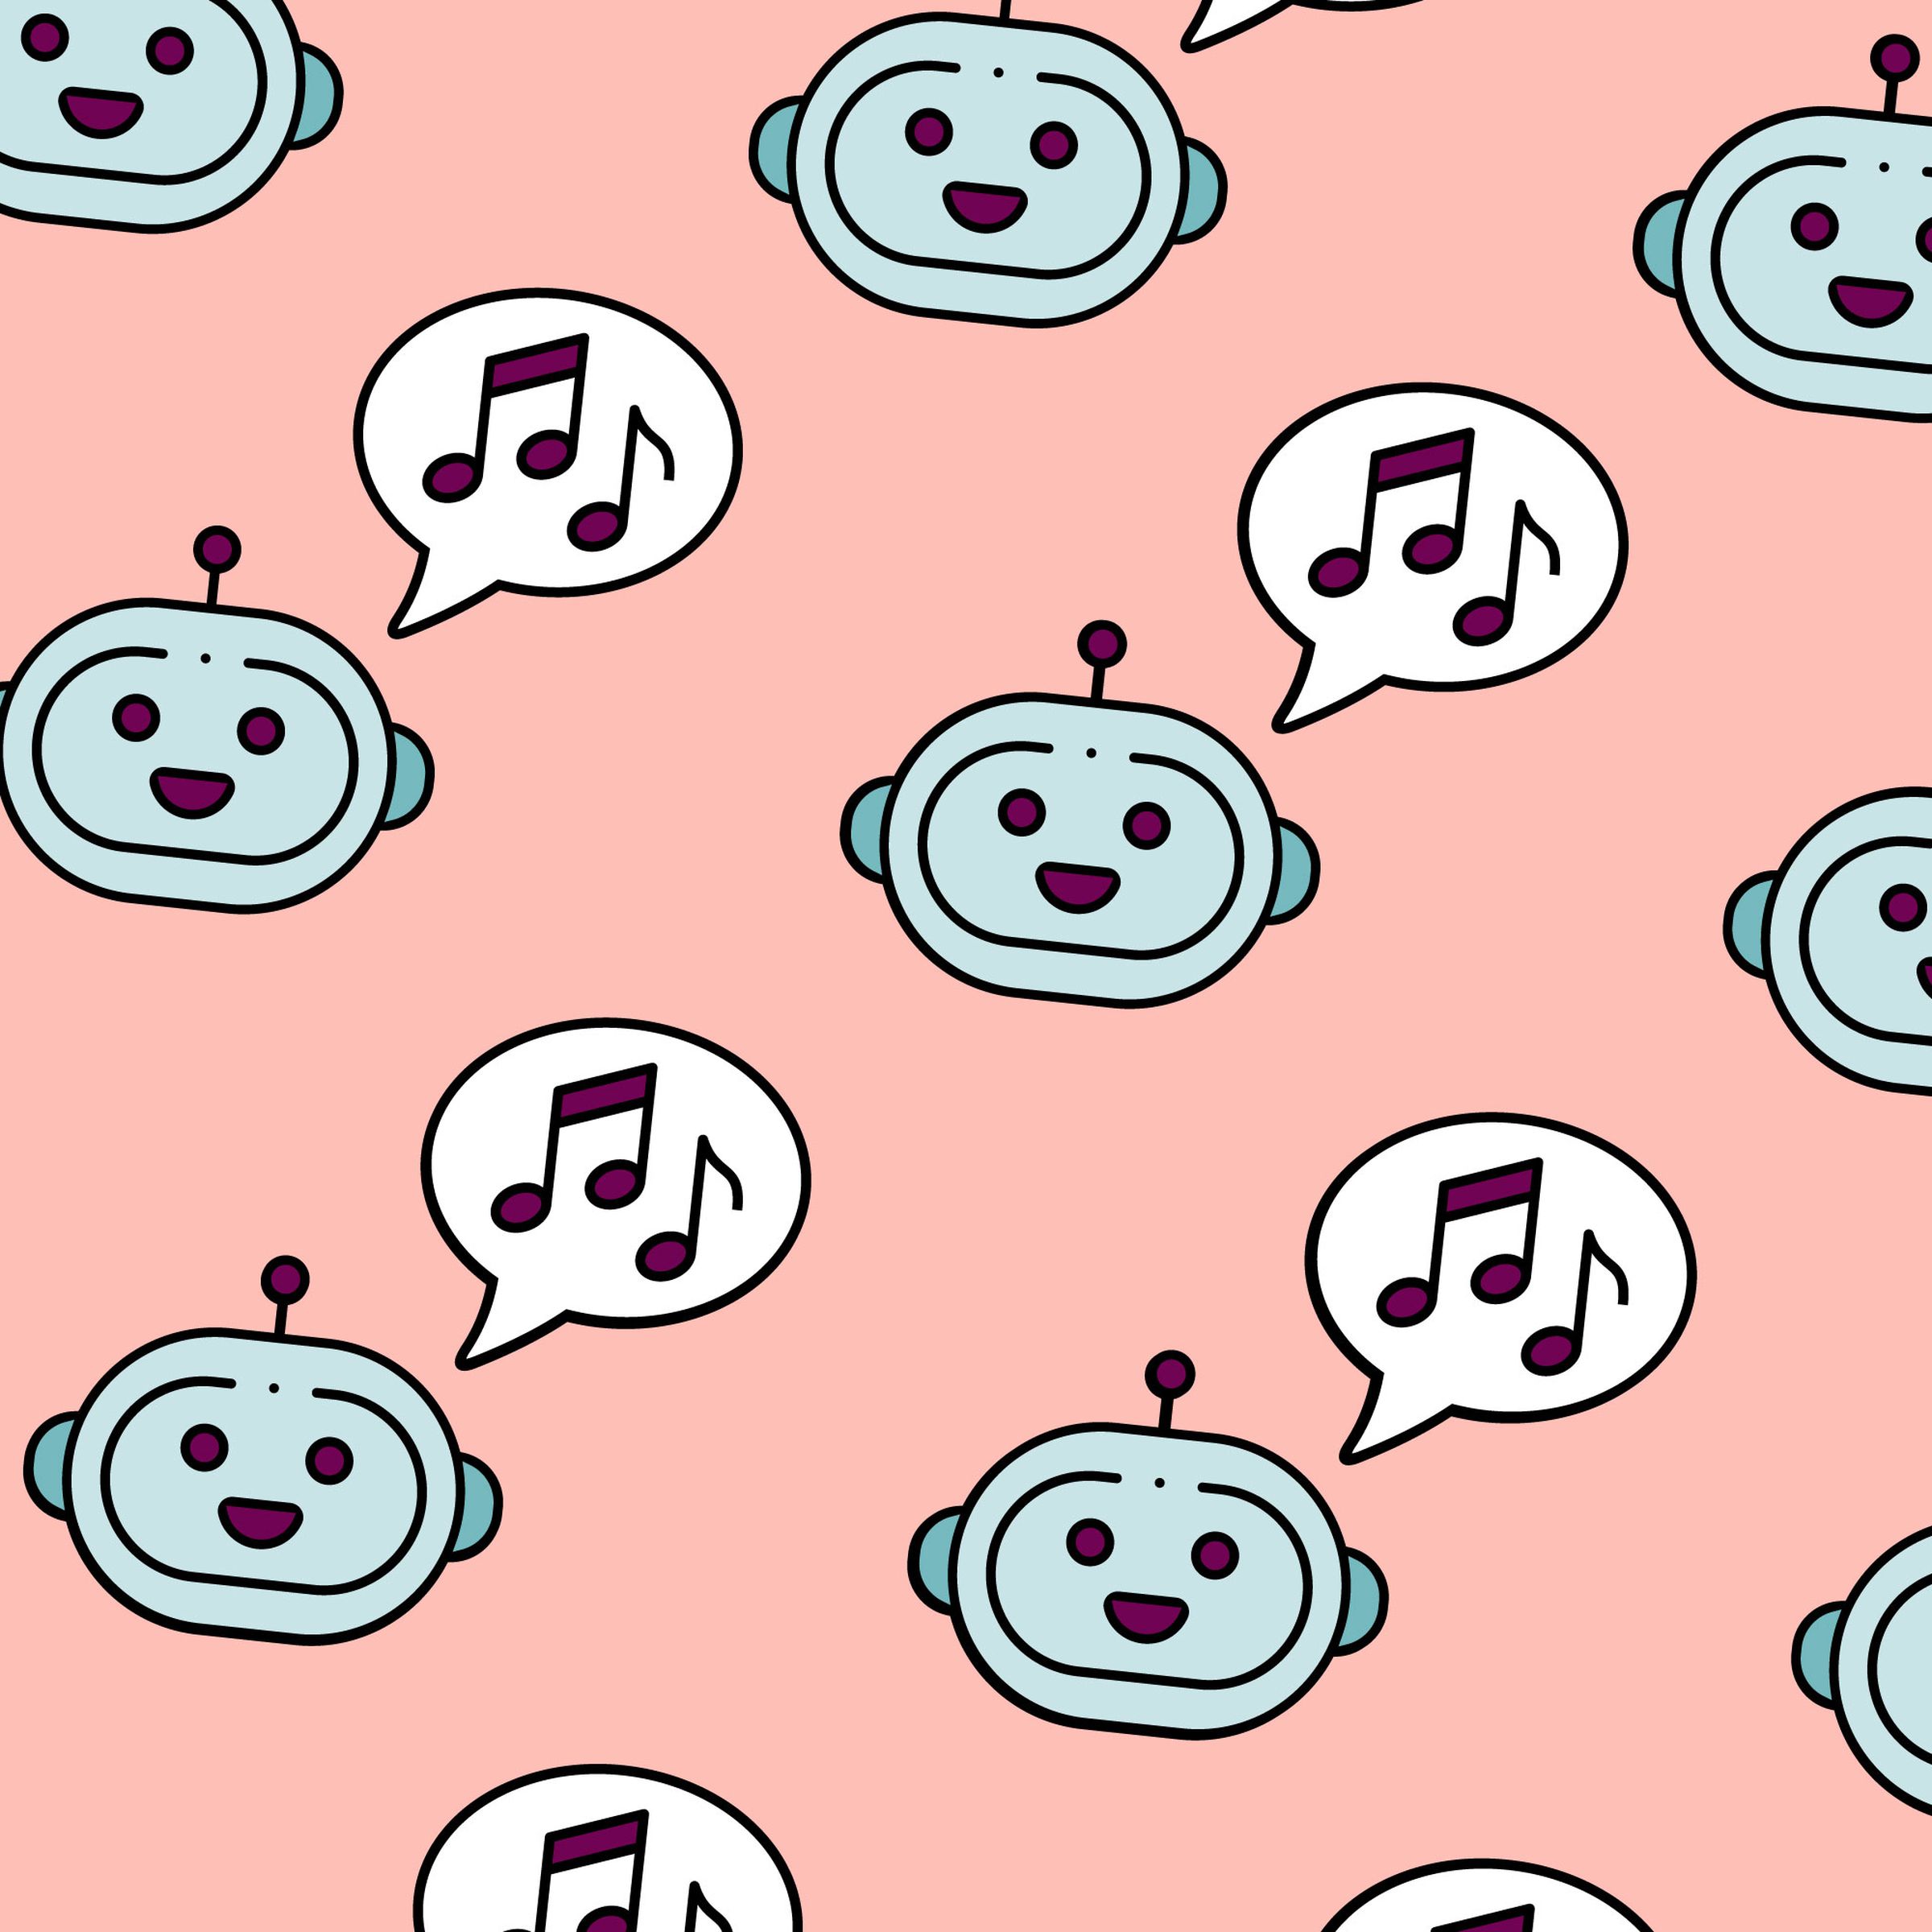 An image showing a slightly off-kilter grid of happy-looking robot faces with\ speech bubbles containing music notes.